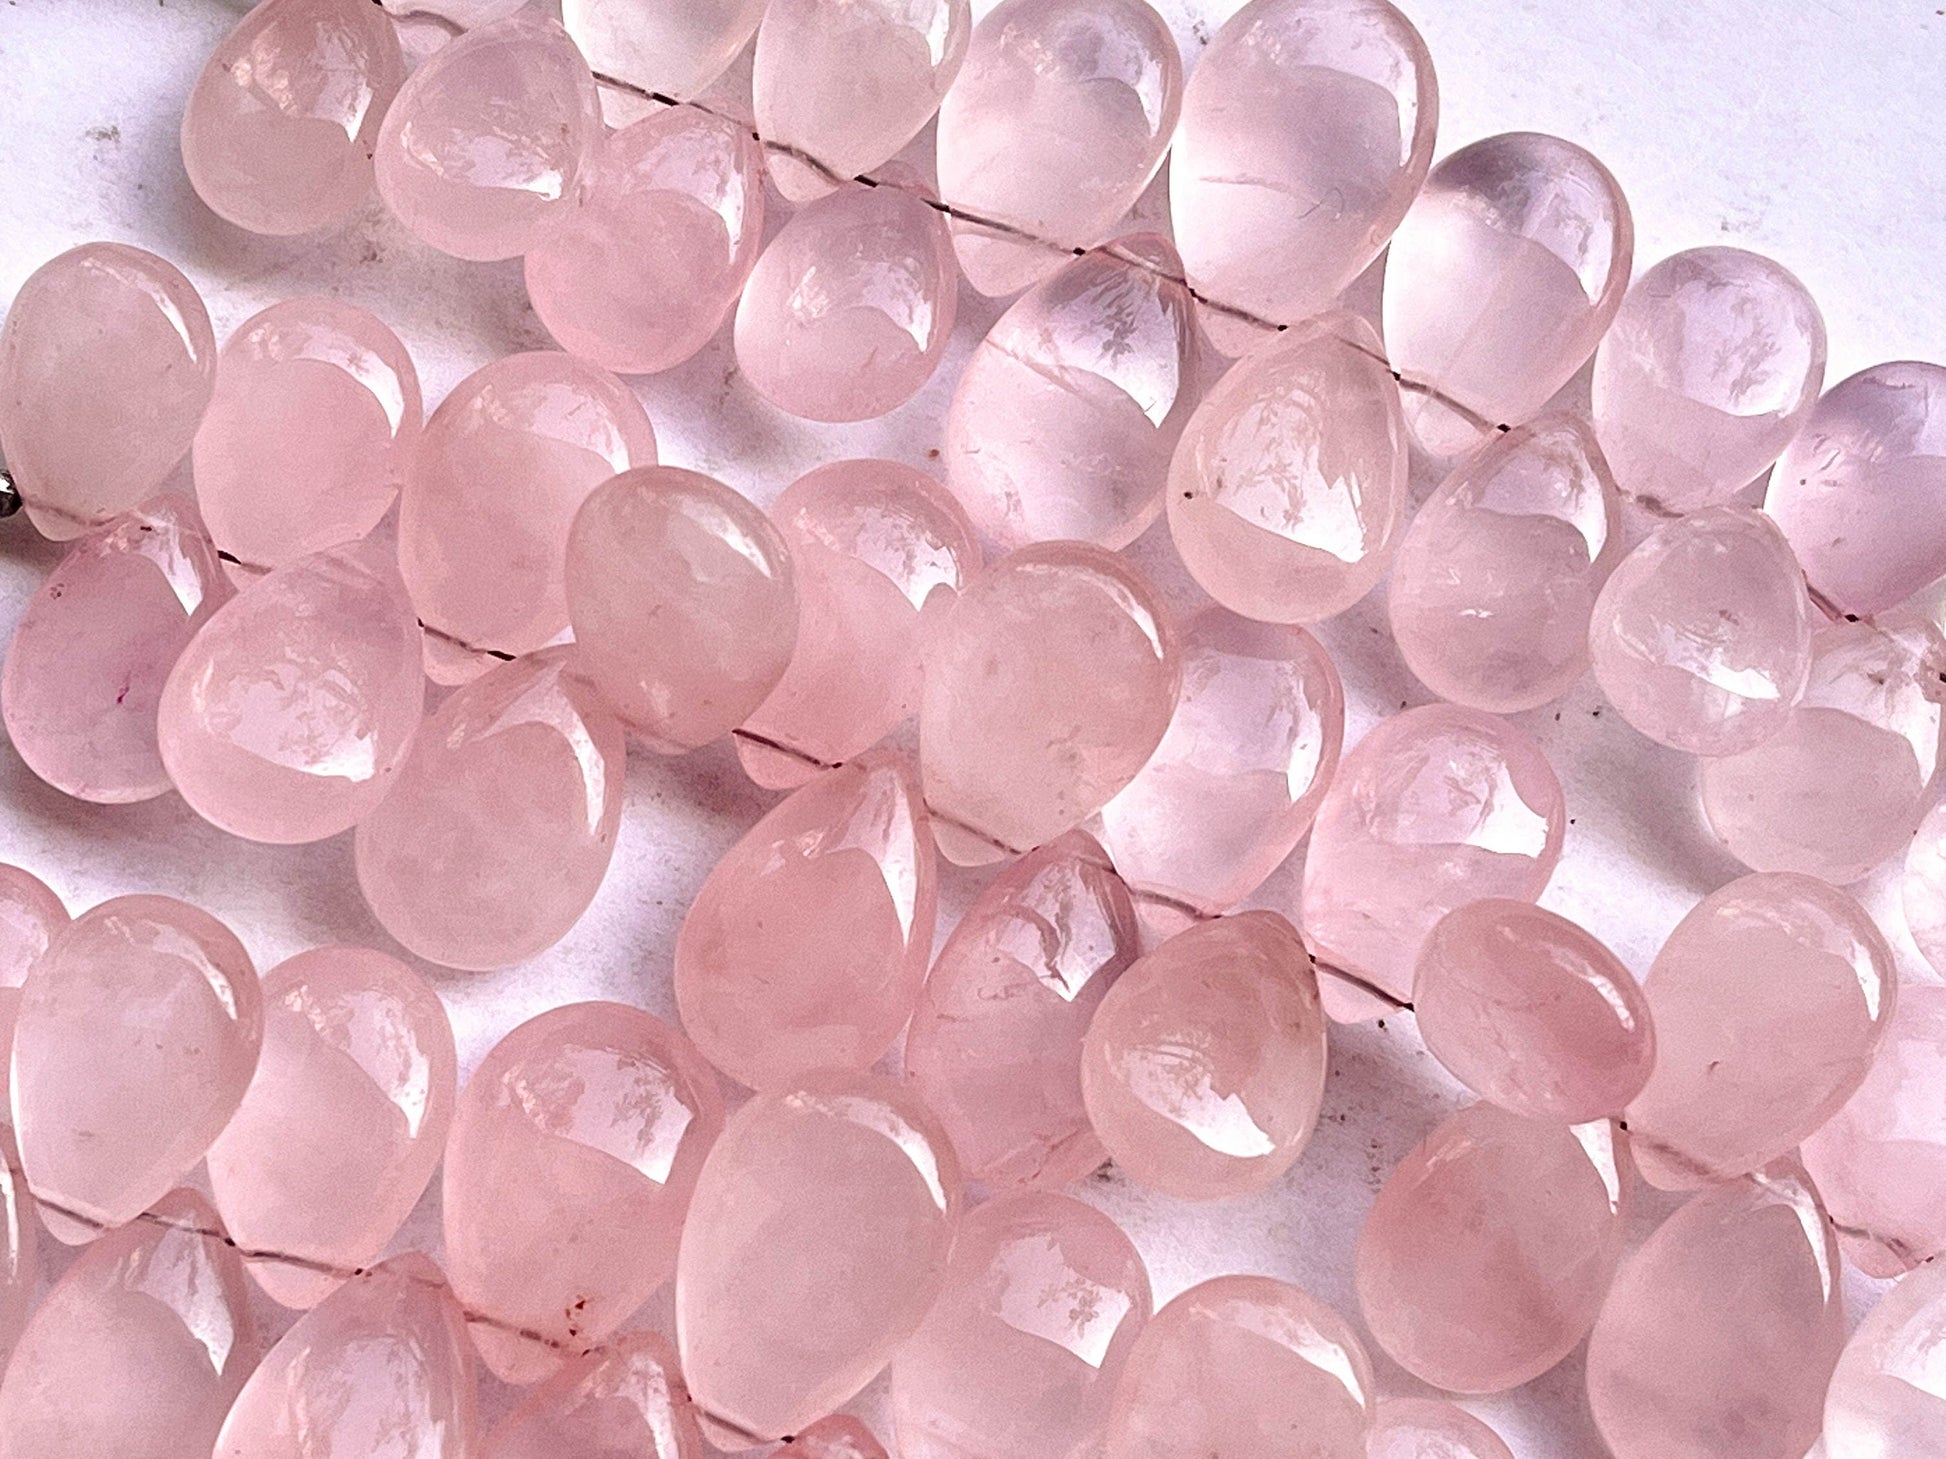 20 Pieces Natural Rose Quartz Smooth Pear Shape Briolette Beads Beadsforyourjewelry